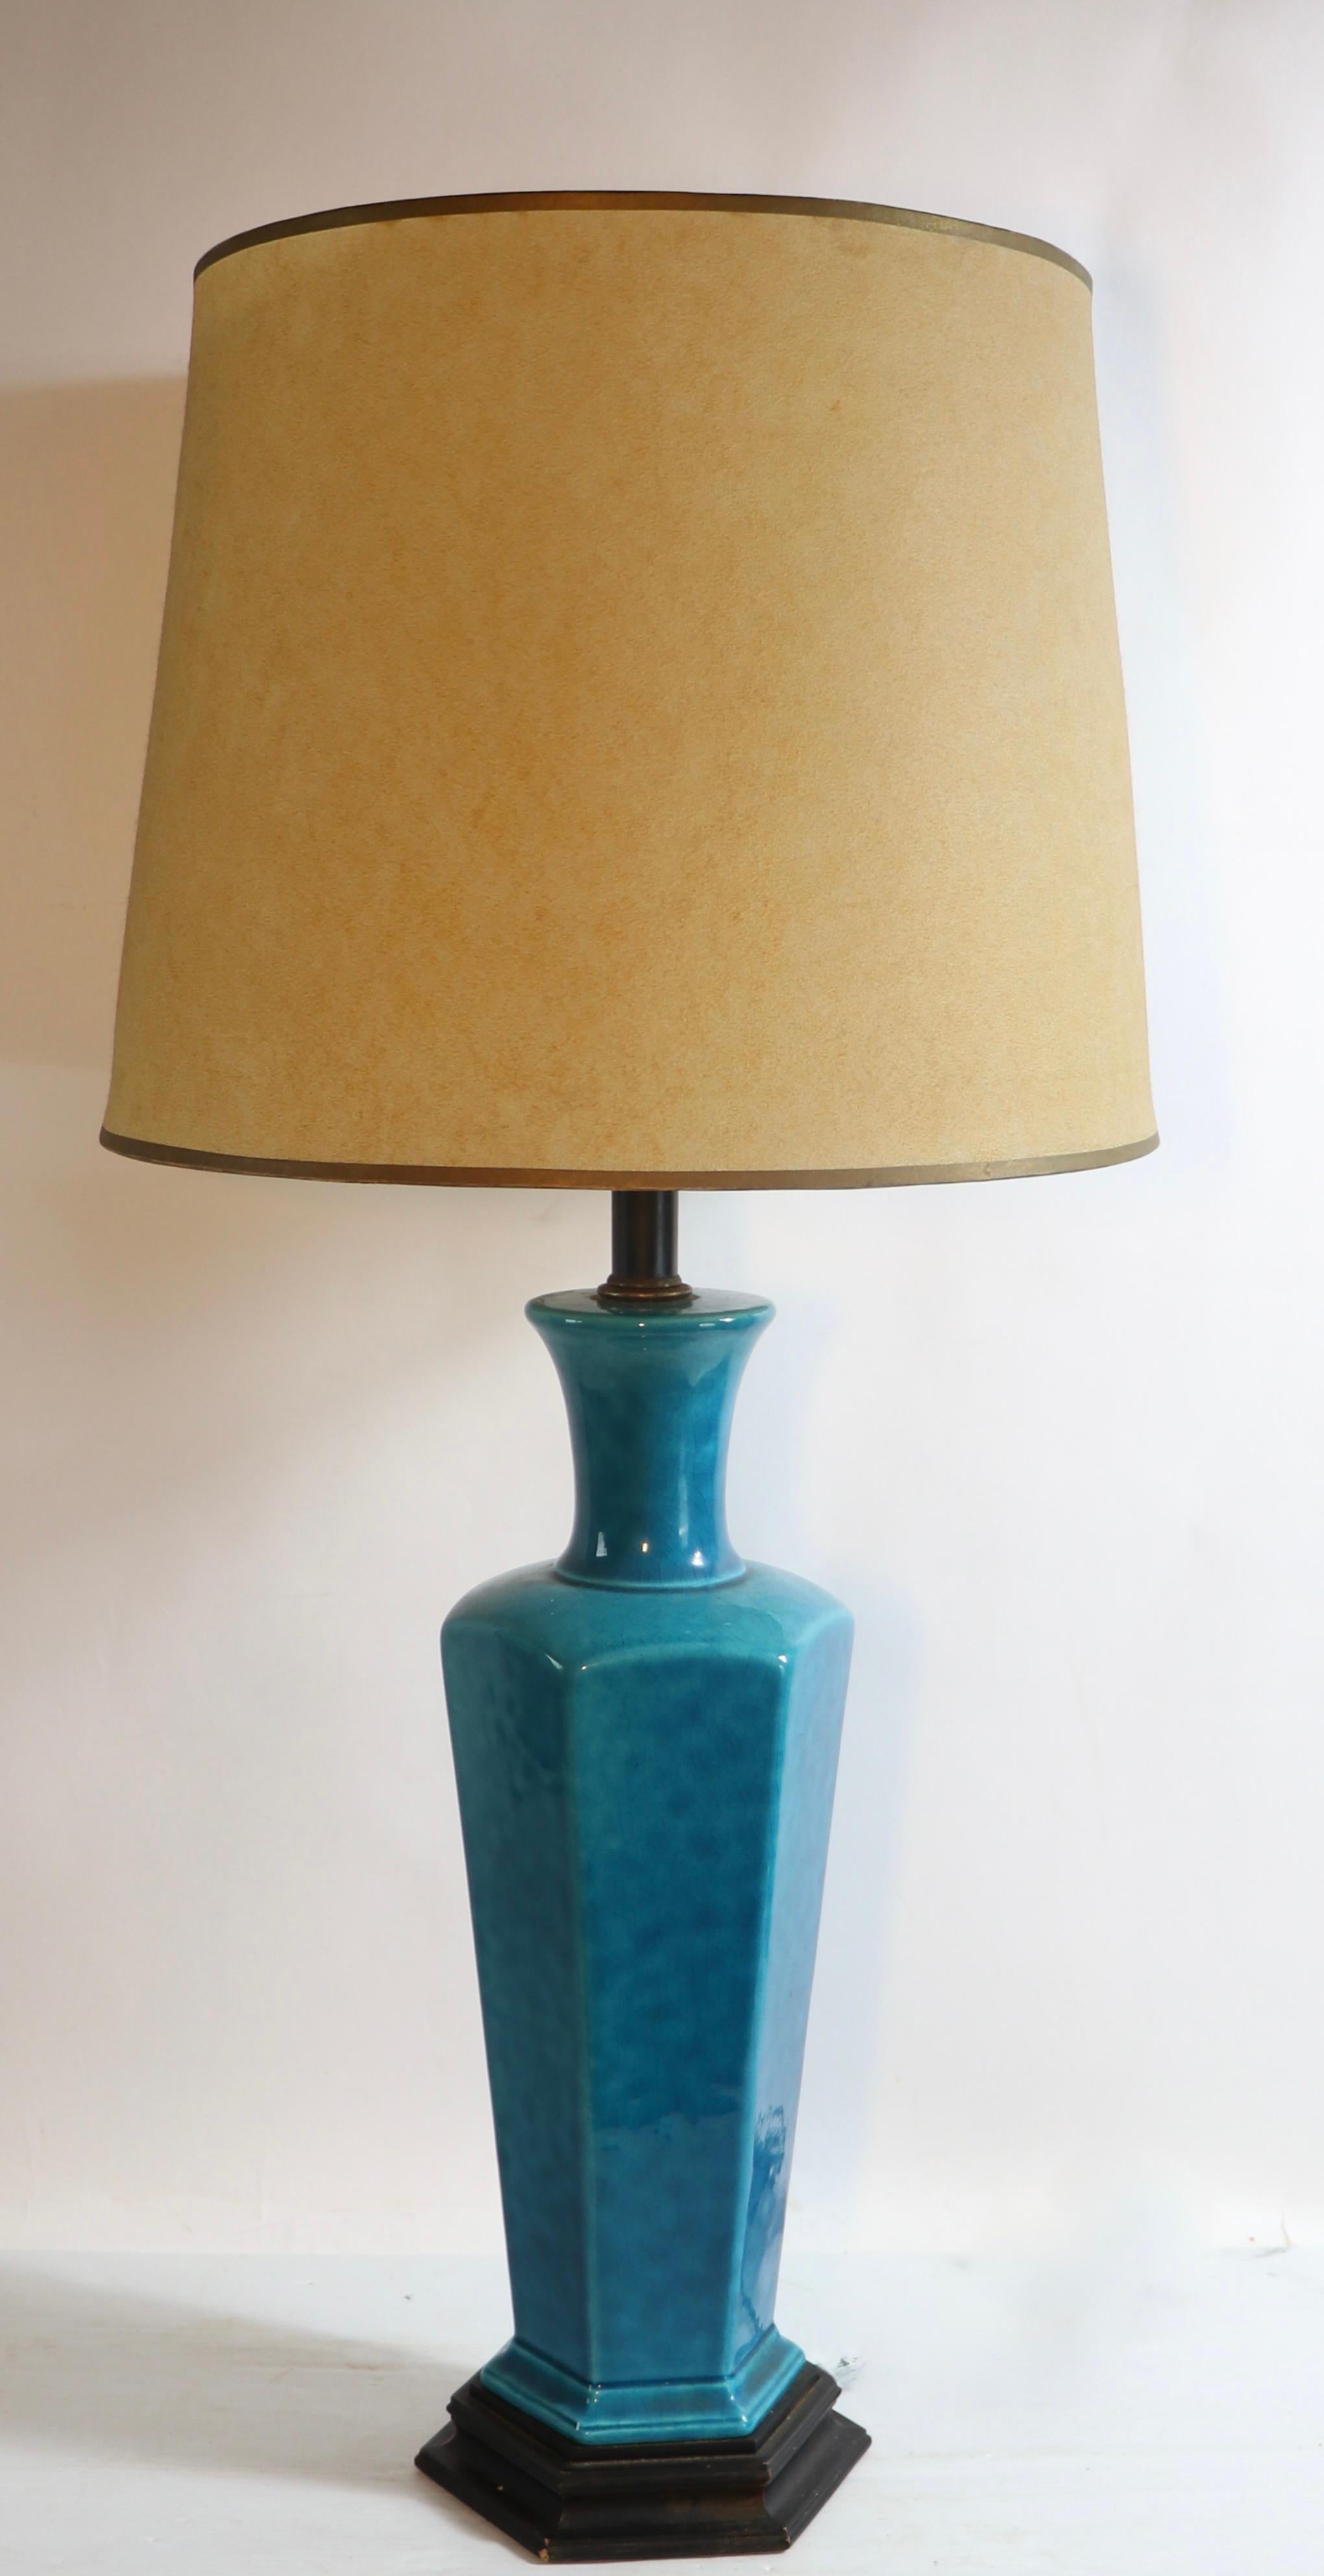 Asia Modern Chinese Style Table Lamp in Blue Craquelure Glaze Finish 1